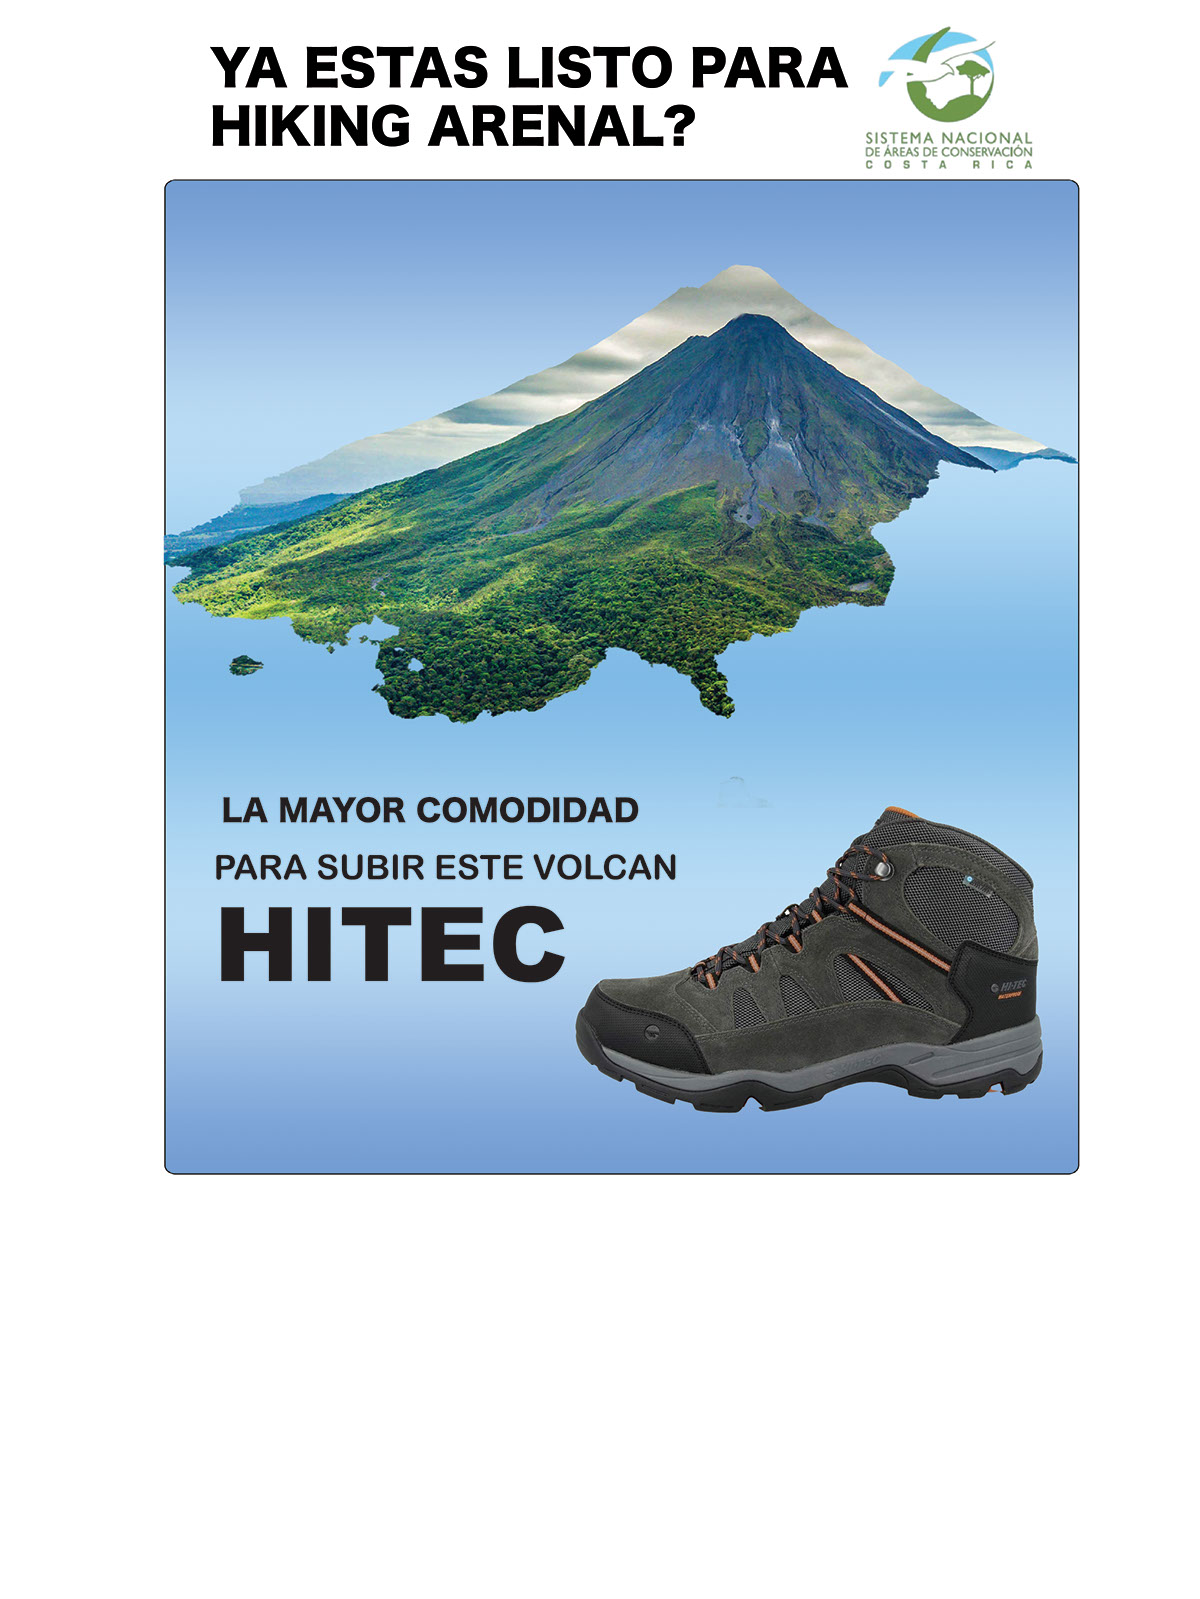 VOLCAN ARENAL rendition image